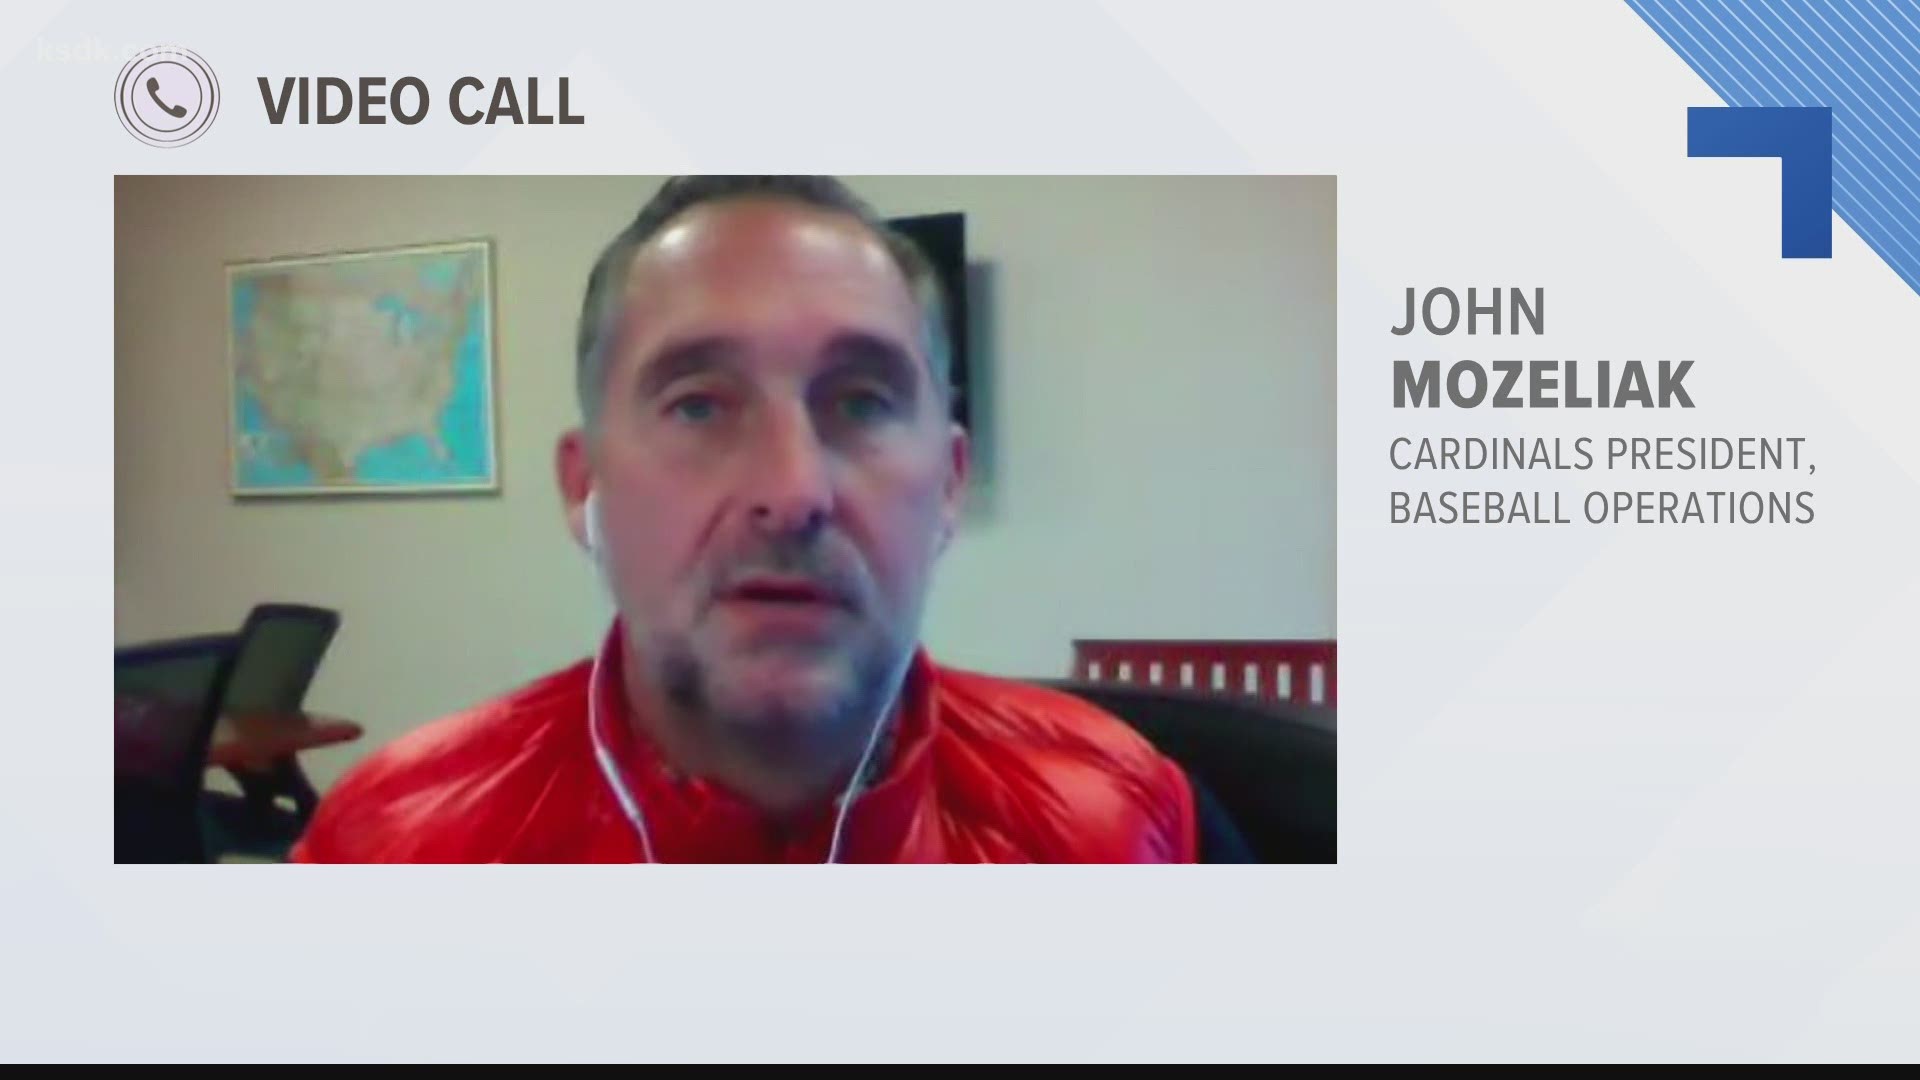 Mozeliak, the Cardinals and the rest of baseball have been pretty quiet so far this hot stove season